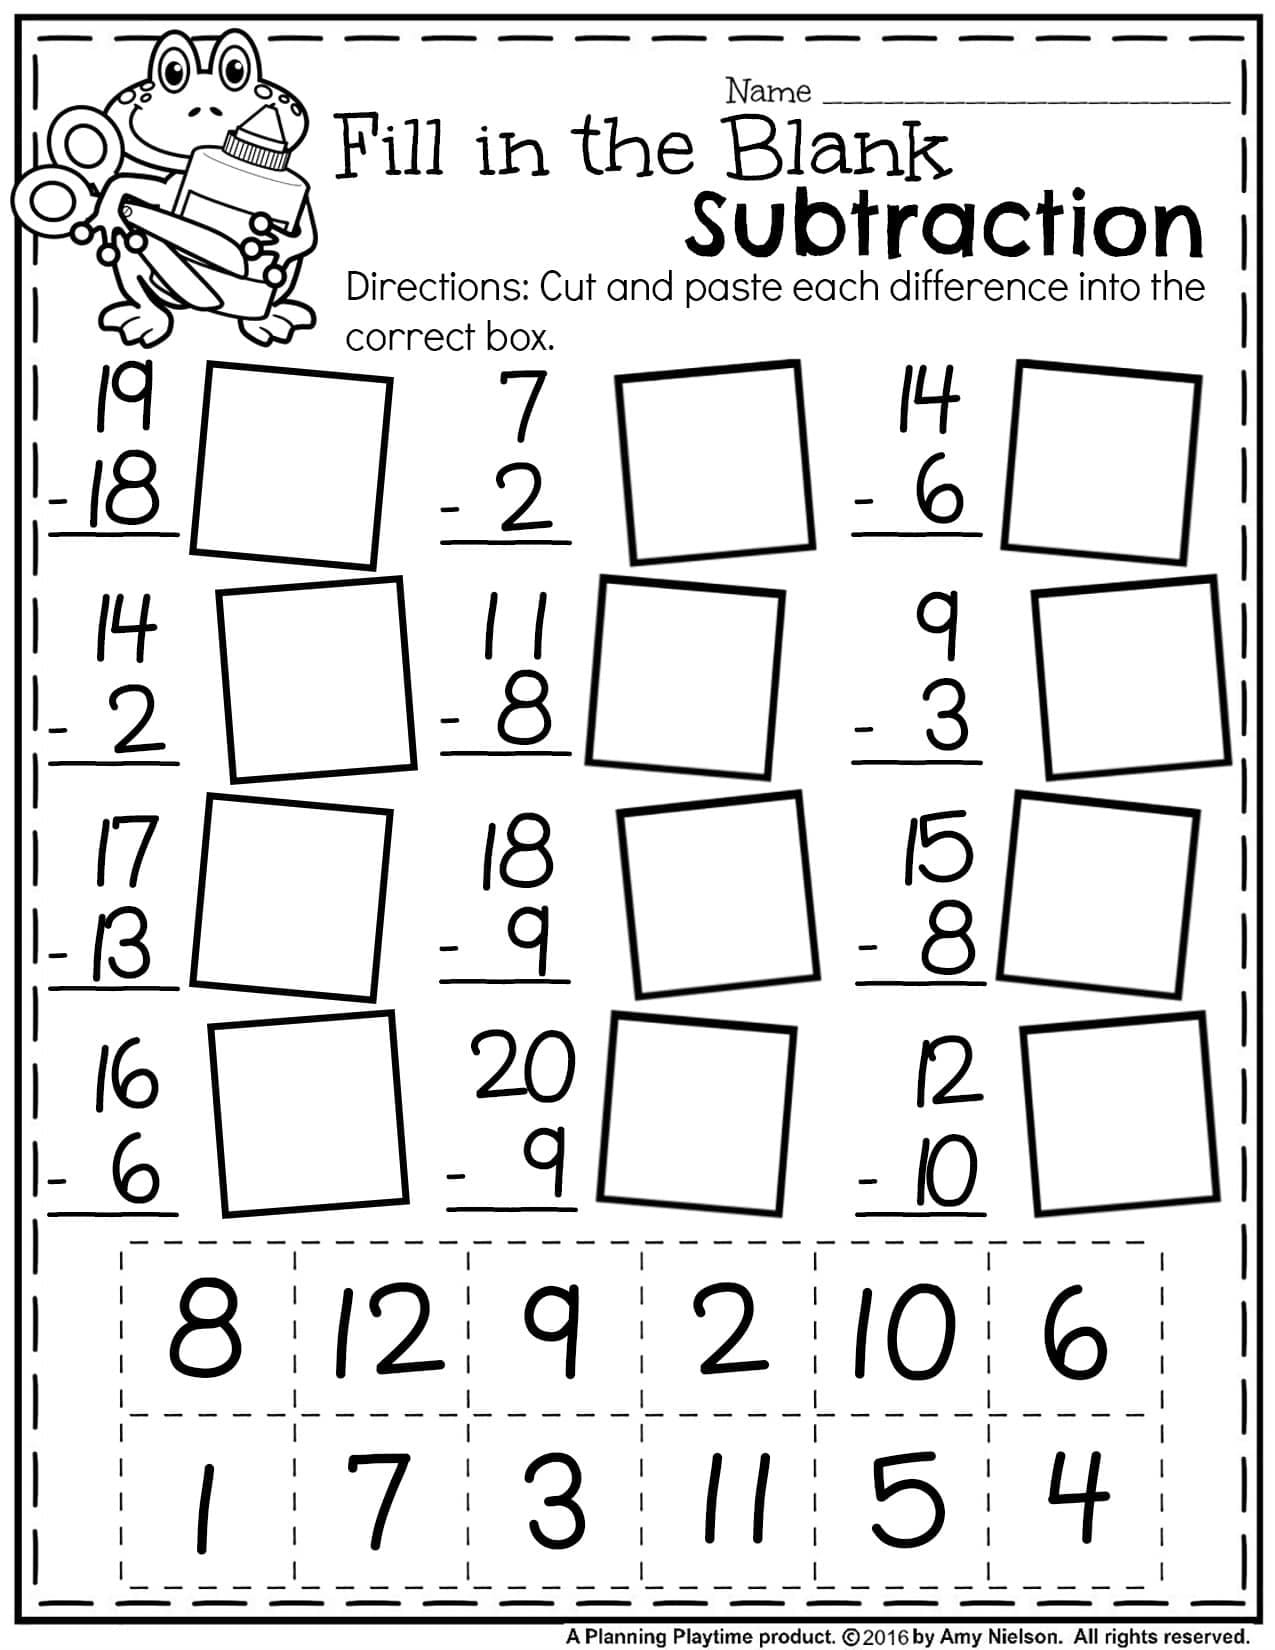 ks1-maths-worksheets-k5-worksheets-ks1-maths-worksheets-place-value-worksheets-free